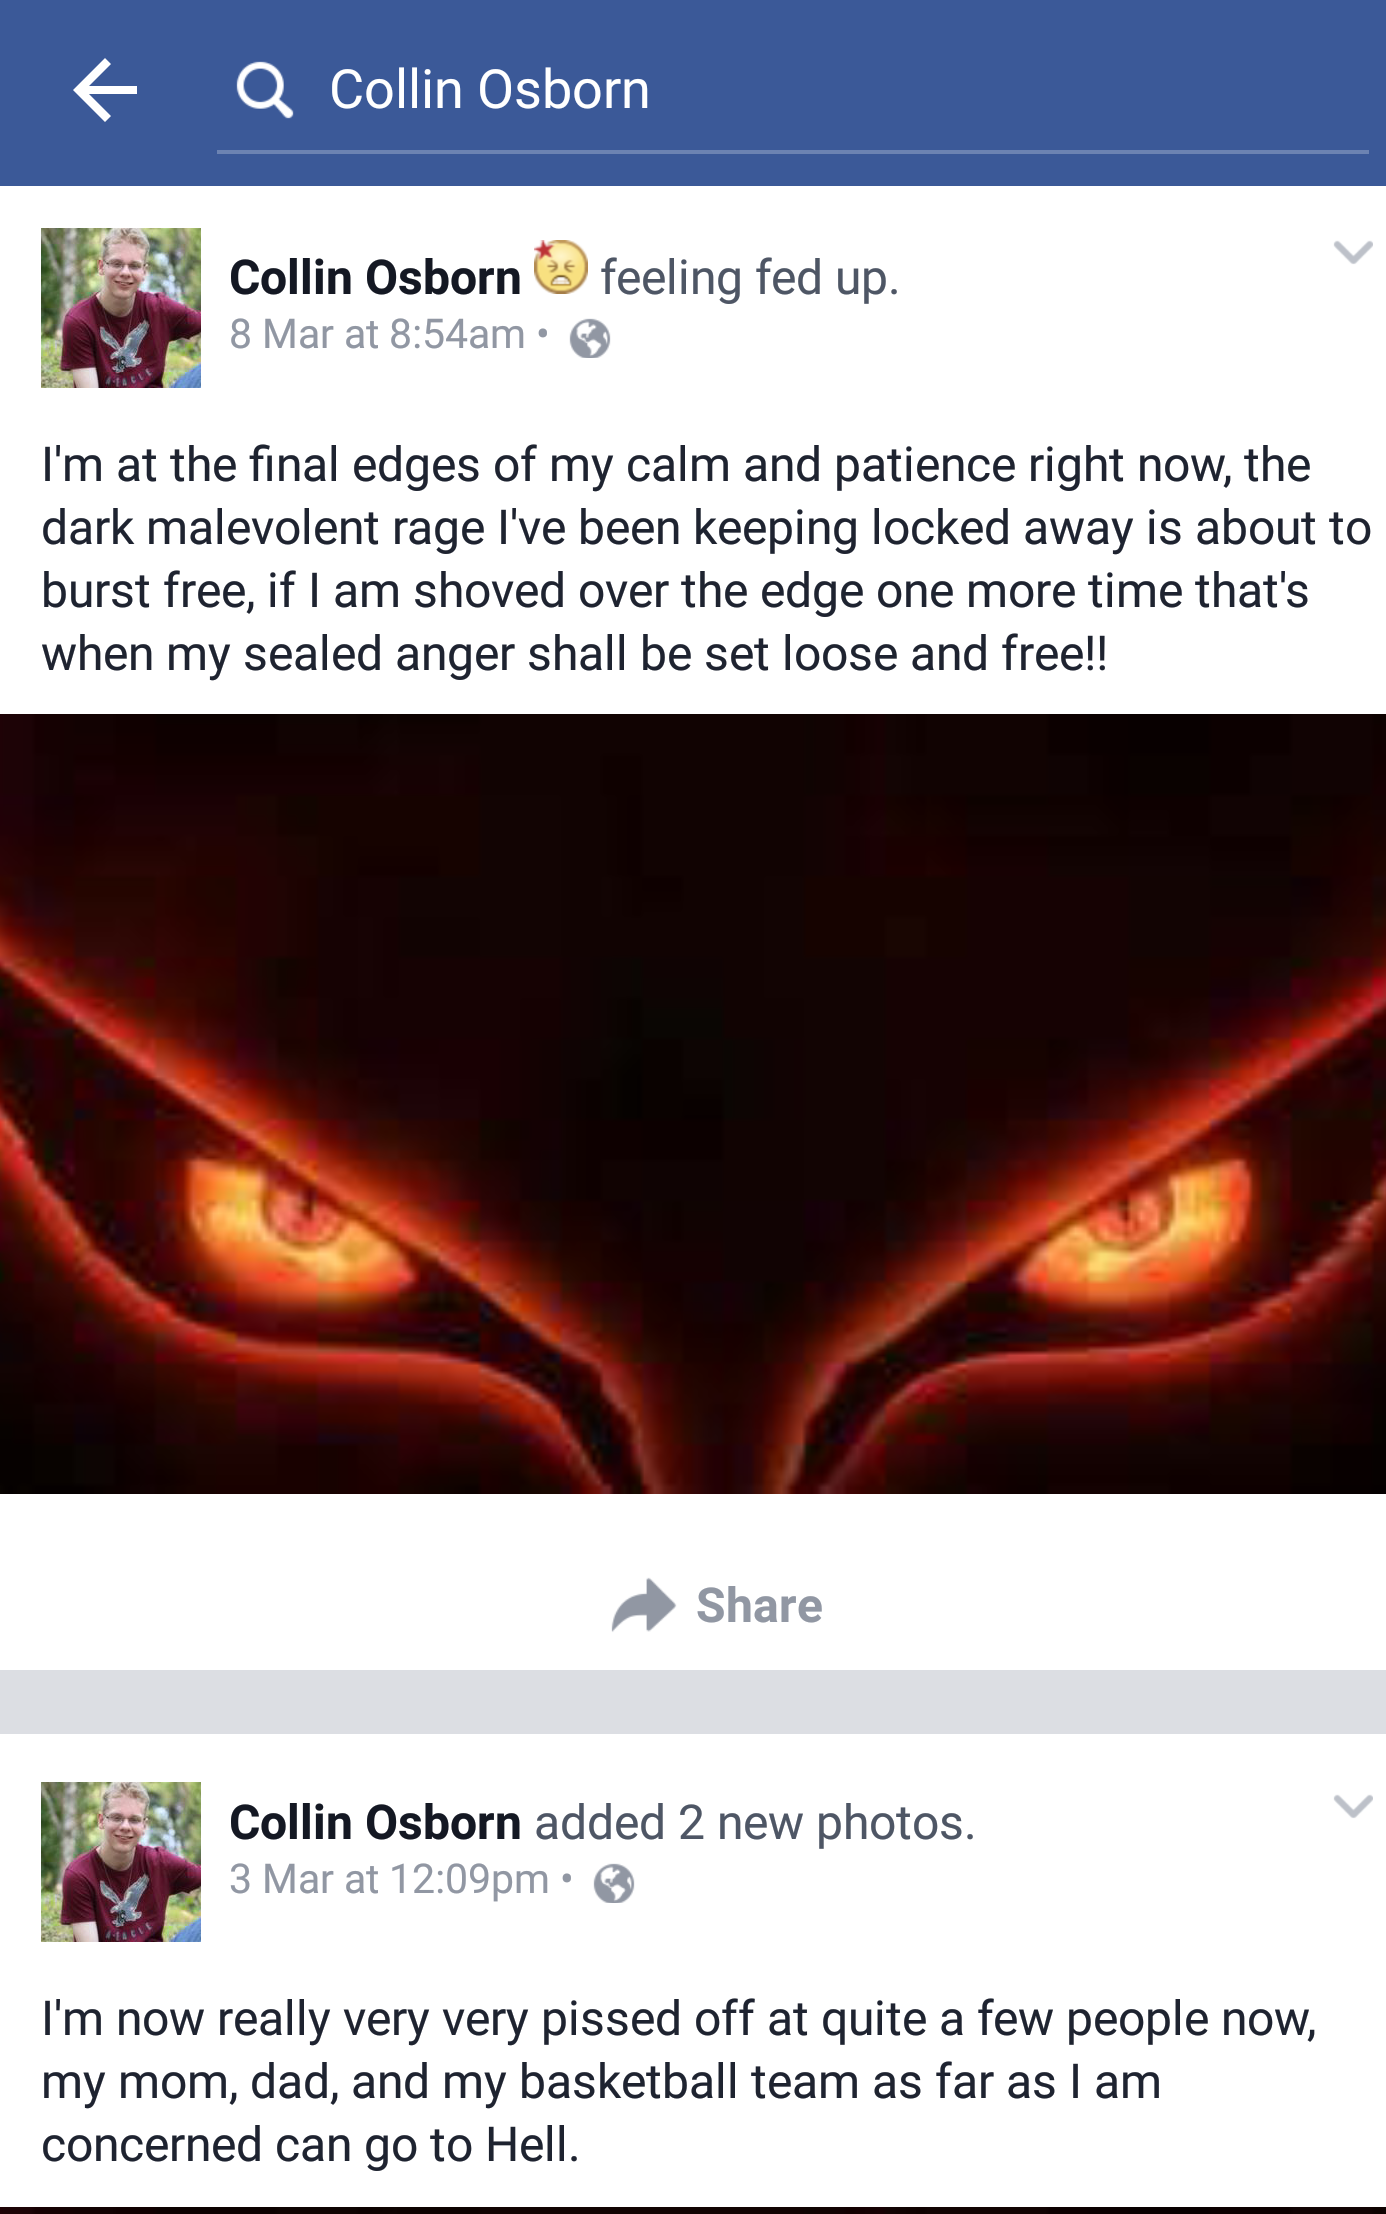 edge cringe - E Q Collin Osborn Collin Osborn 8 Mar at am feeling fed up. I'm at the final edges of my calm and patience right now, the dark malevolent rage I've been keeping locked away is about to burst free, if I am shoved over the edge one more time t